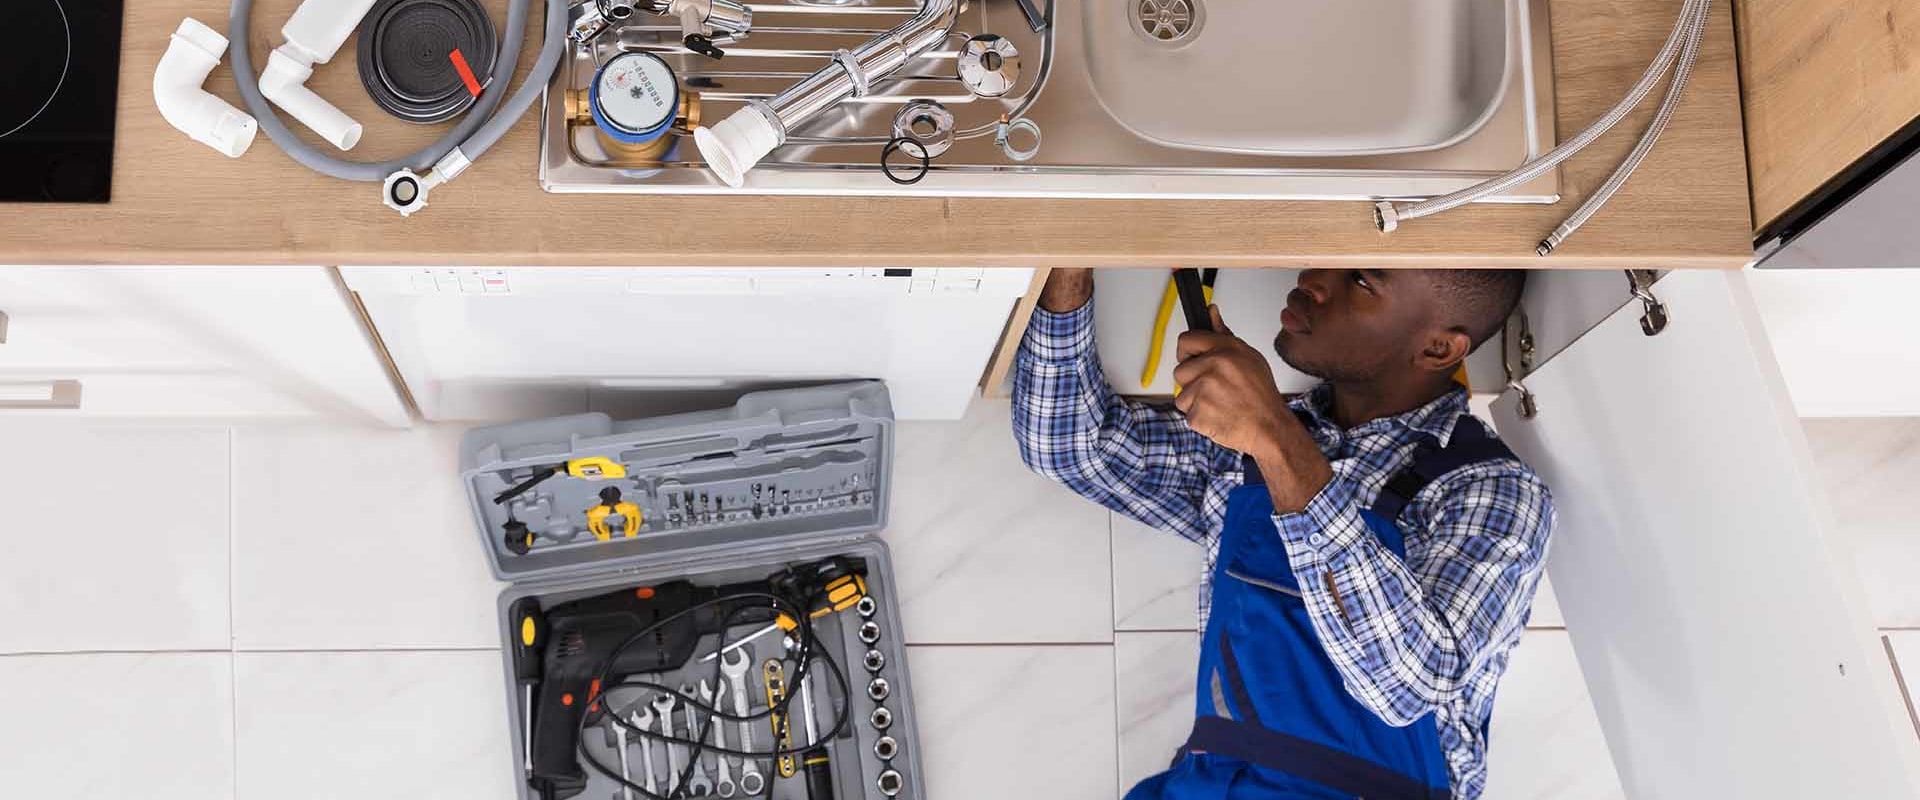 Researching Local Plumbers: What to Consider and How to Find the Right One